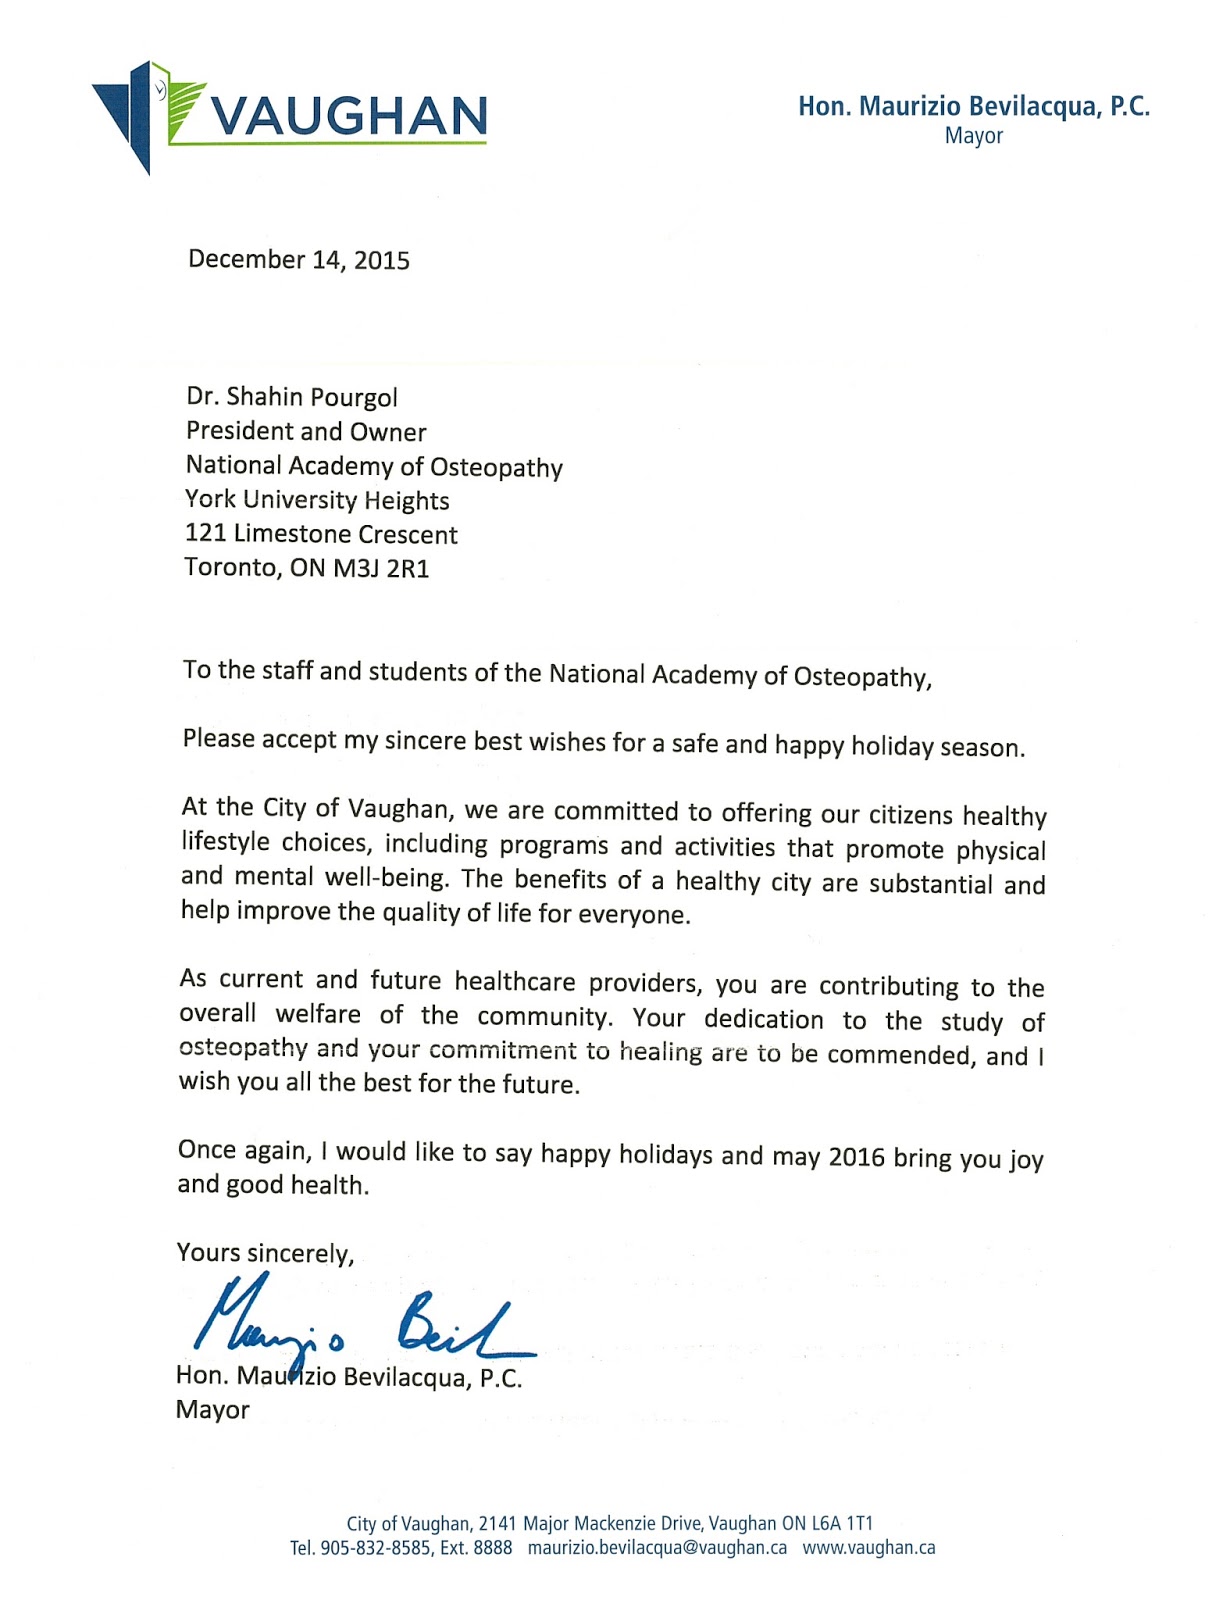 How do you address a letter to a mayor?